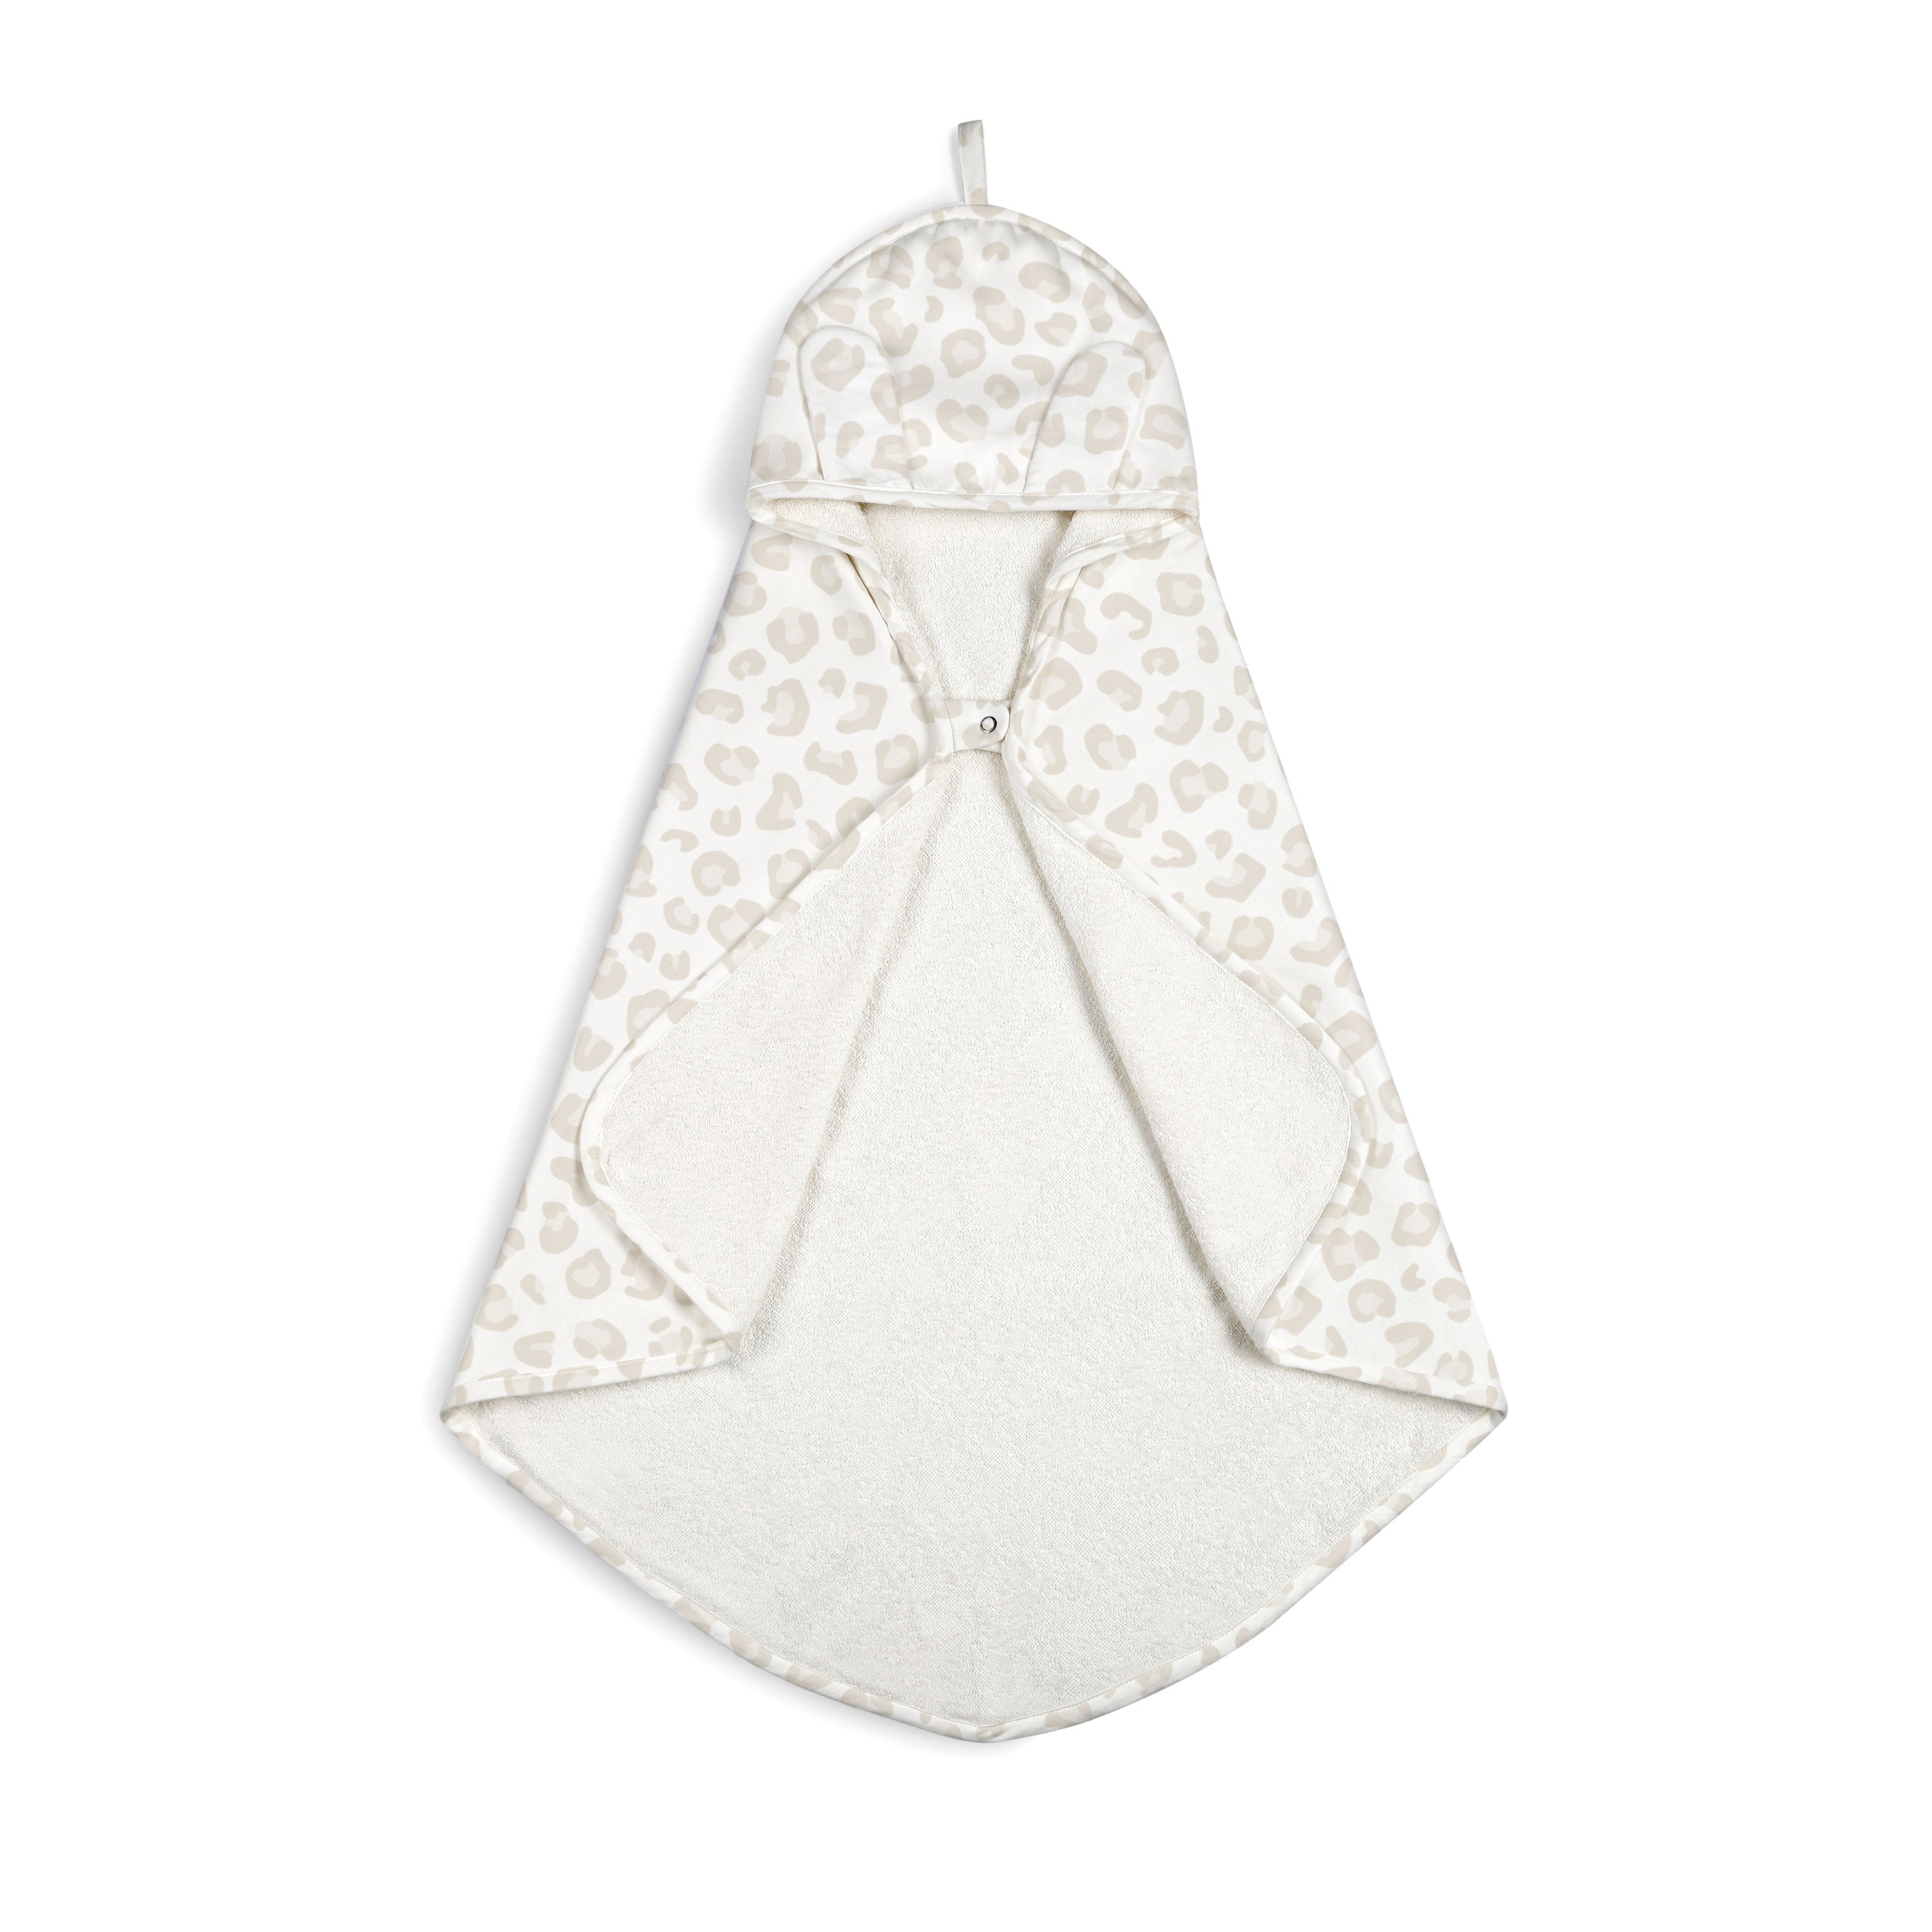 A Organic Cotton Hooded Baby Towel & Poncho - Wild with a beige and white leopard print design, featuring an inverted zipper, displayed on a white background by Makemake Organics.